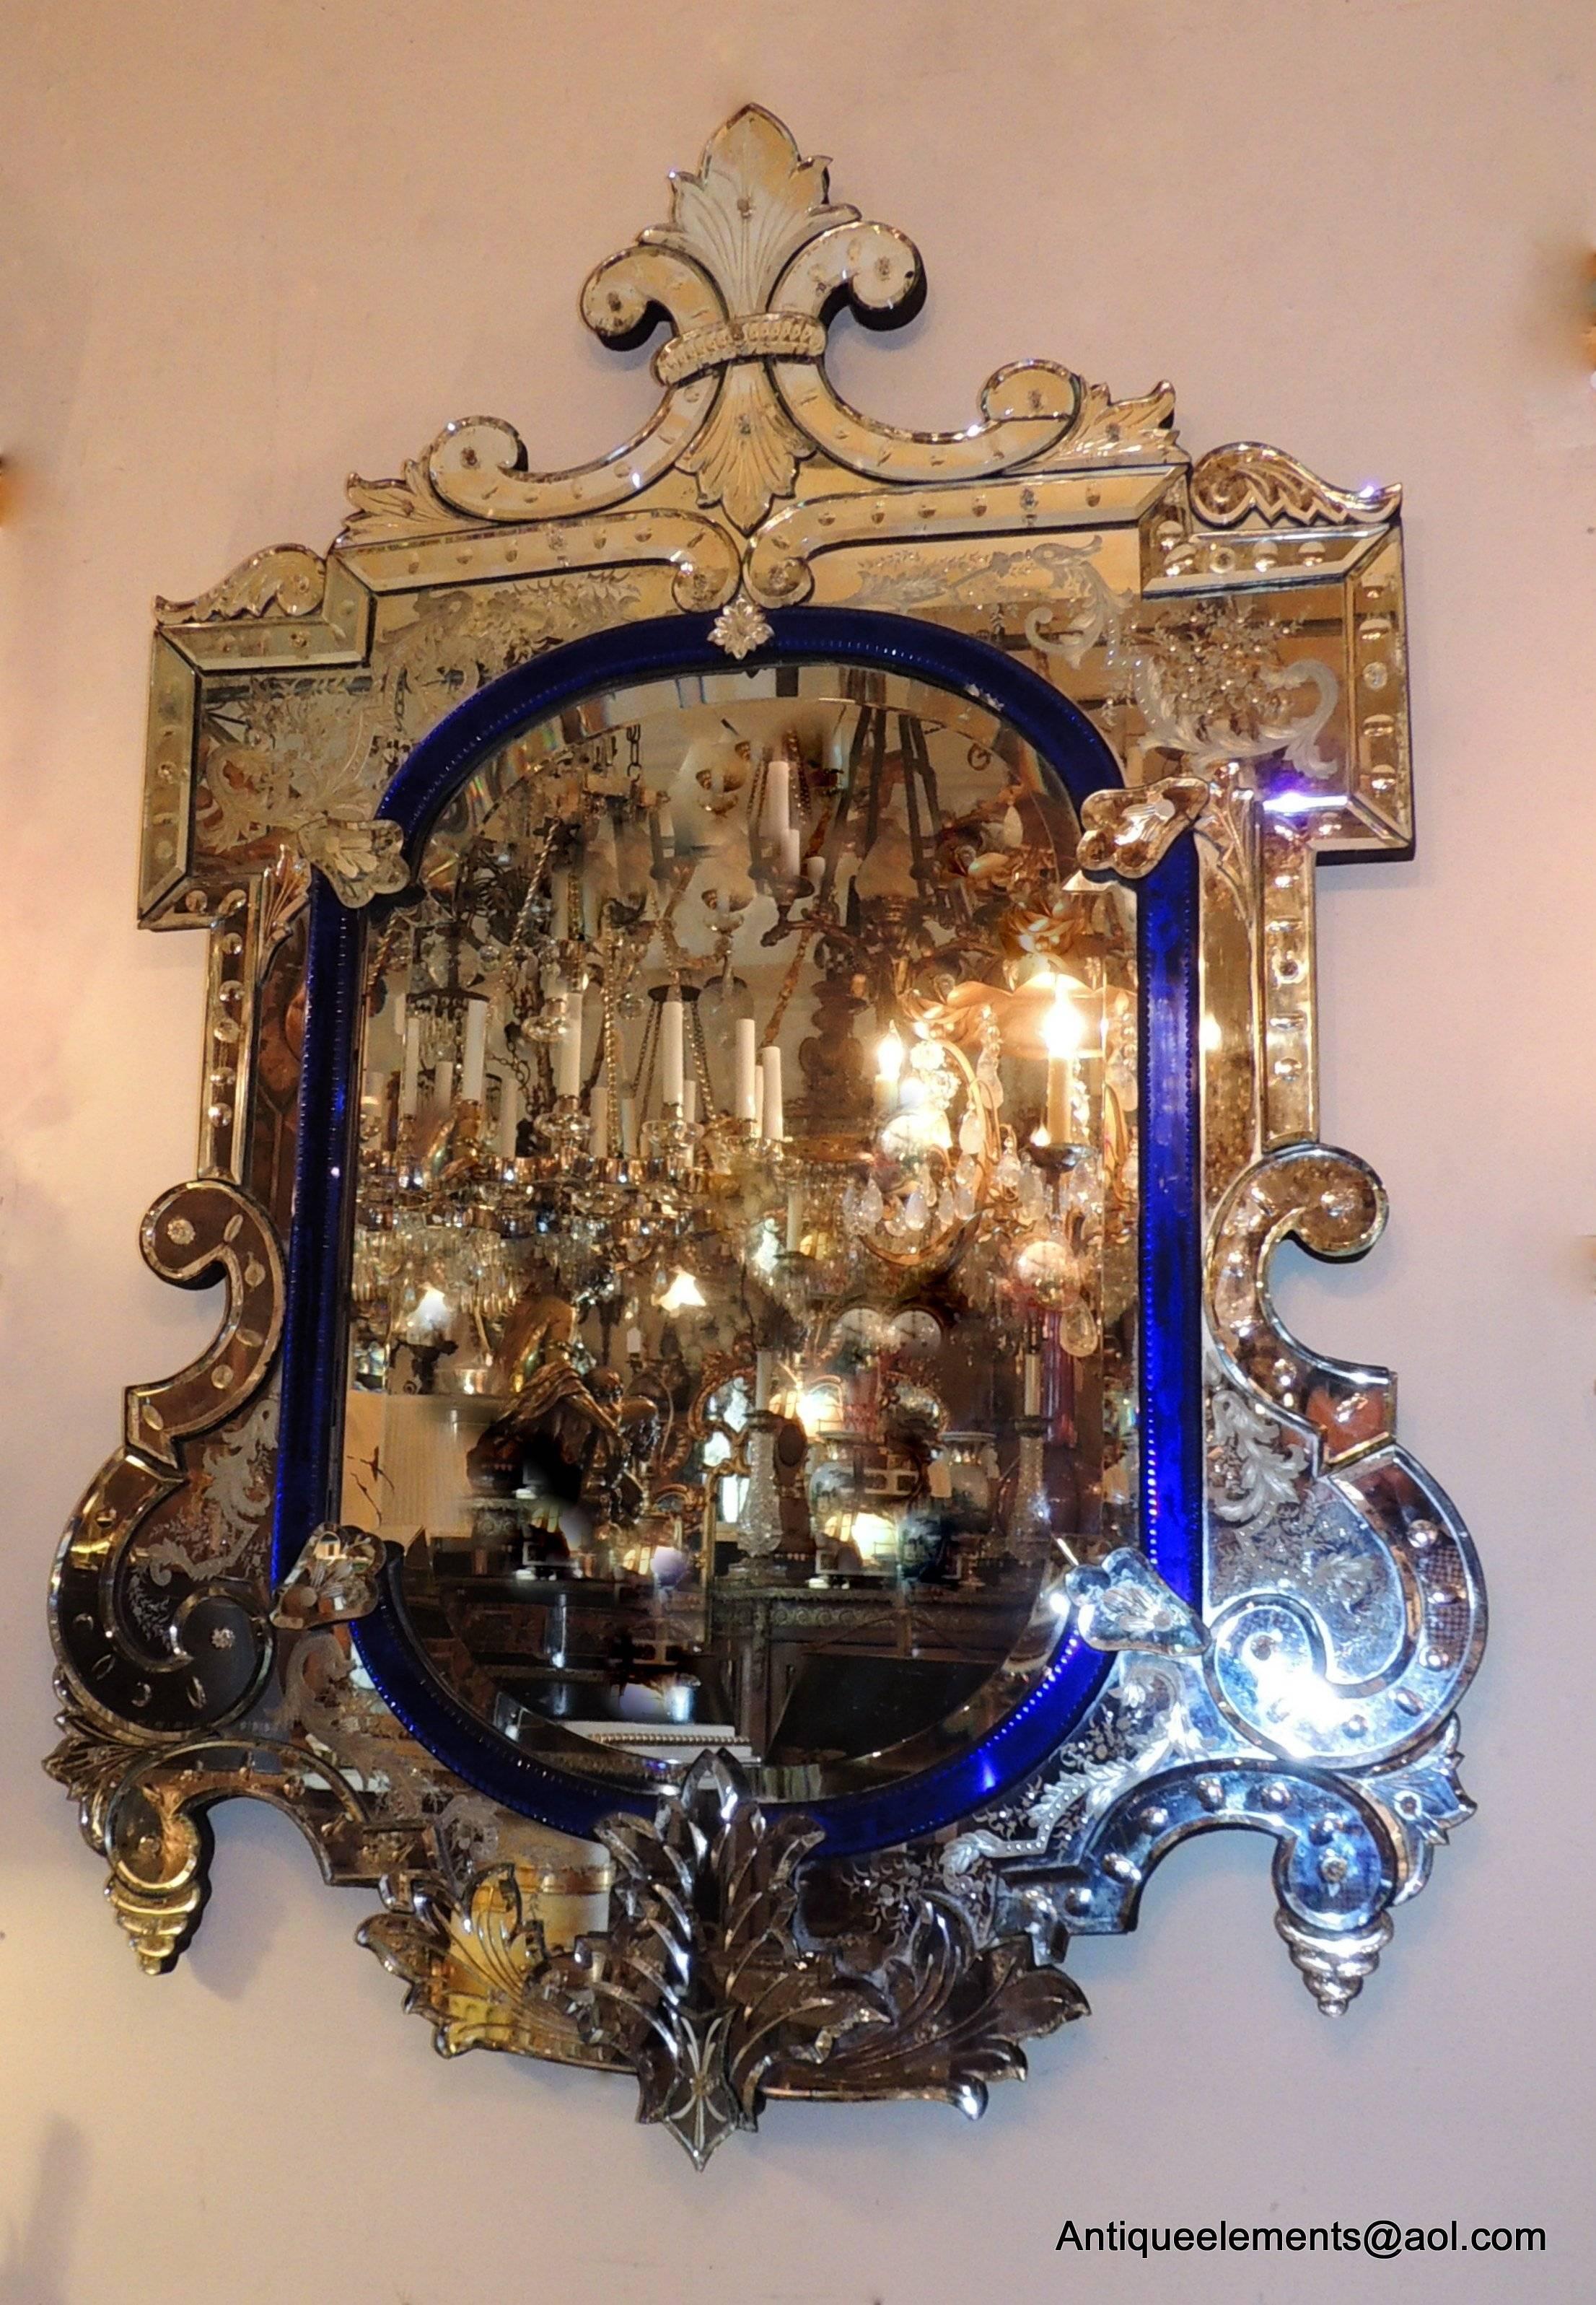 This unusual Venetian mirror is beautifully detailed with wonderful etched elements and scrolls accenting all the edges of this mirror. The striking blue crystal edge framing the beveled mirror finishes this antique Venetian mirror.
Two of the